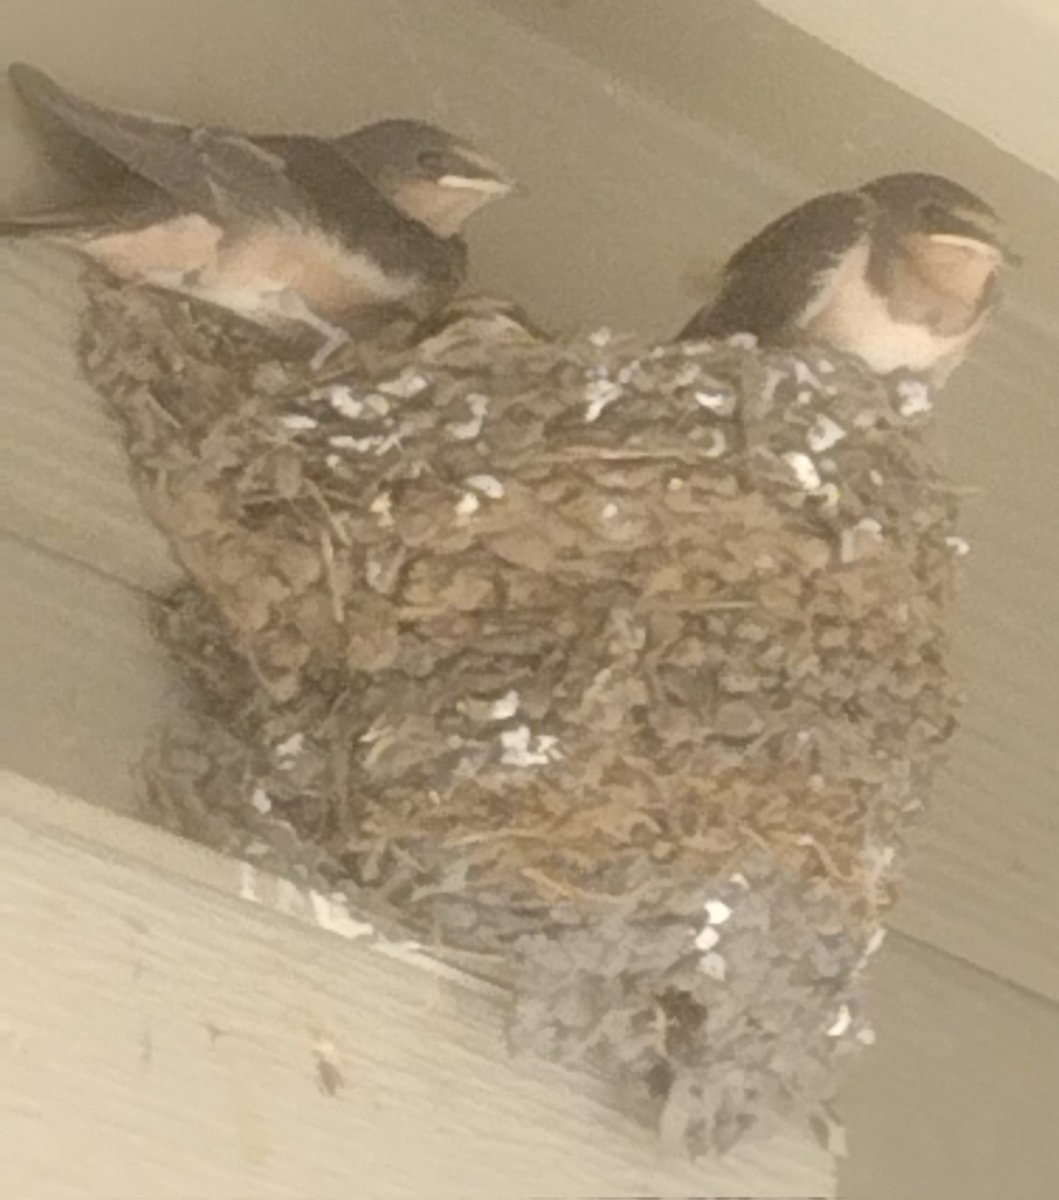 Can you say cuteness overload 😍 #BirdTwitter #NatureTherapy #love #IAM proud to host the #lovebirds & their #NatureMagic #NatureWow #naturebeauty #NatureIsAmazing #NatureInspired #Homevisit #birds #LoveyDoveyTuesday #blessings #MindfulLiving #MindfulMoments